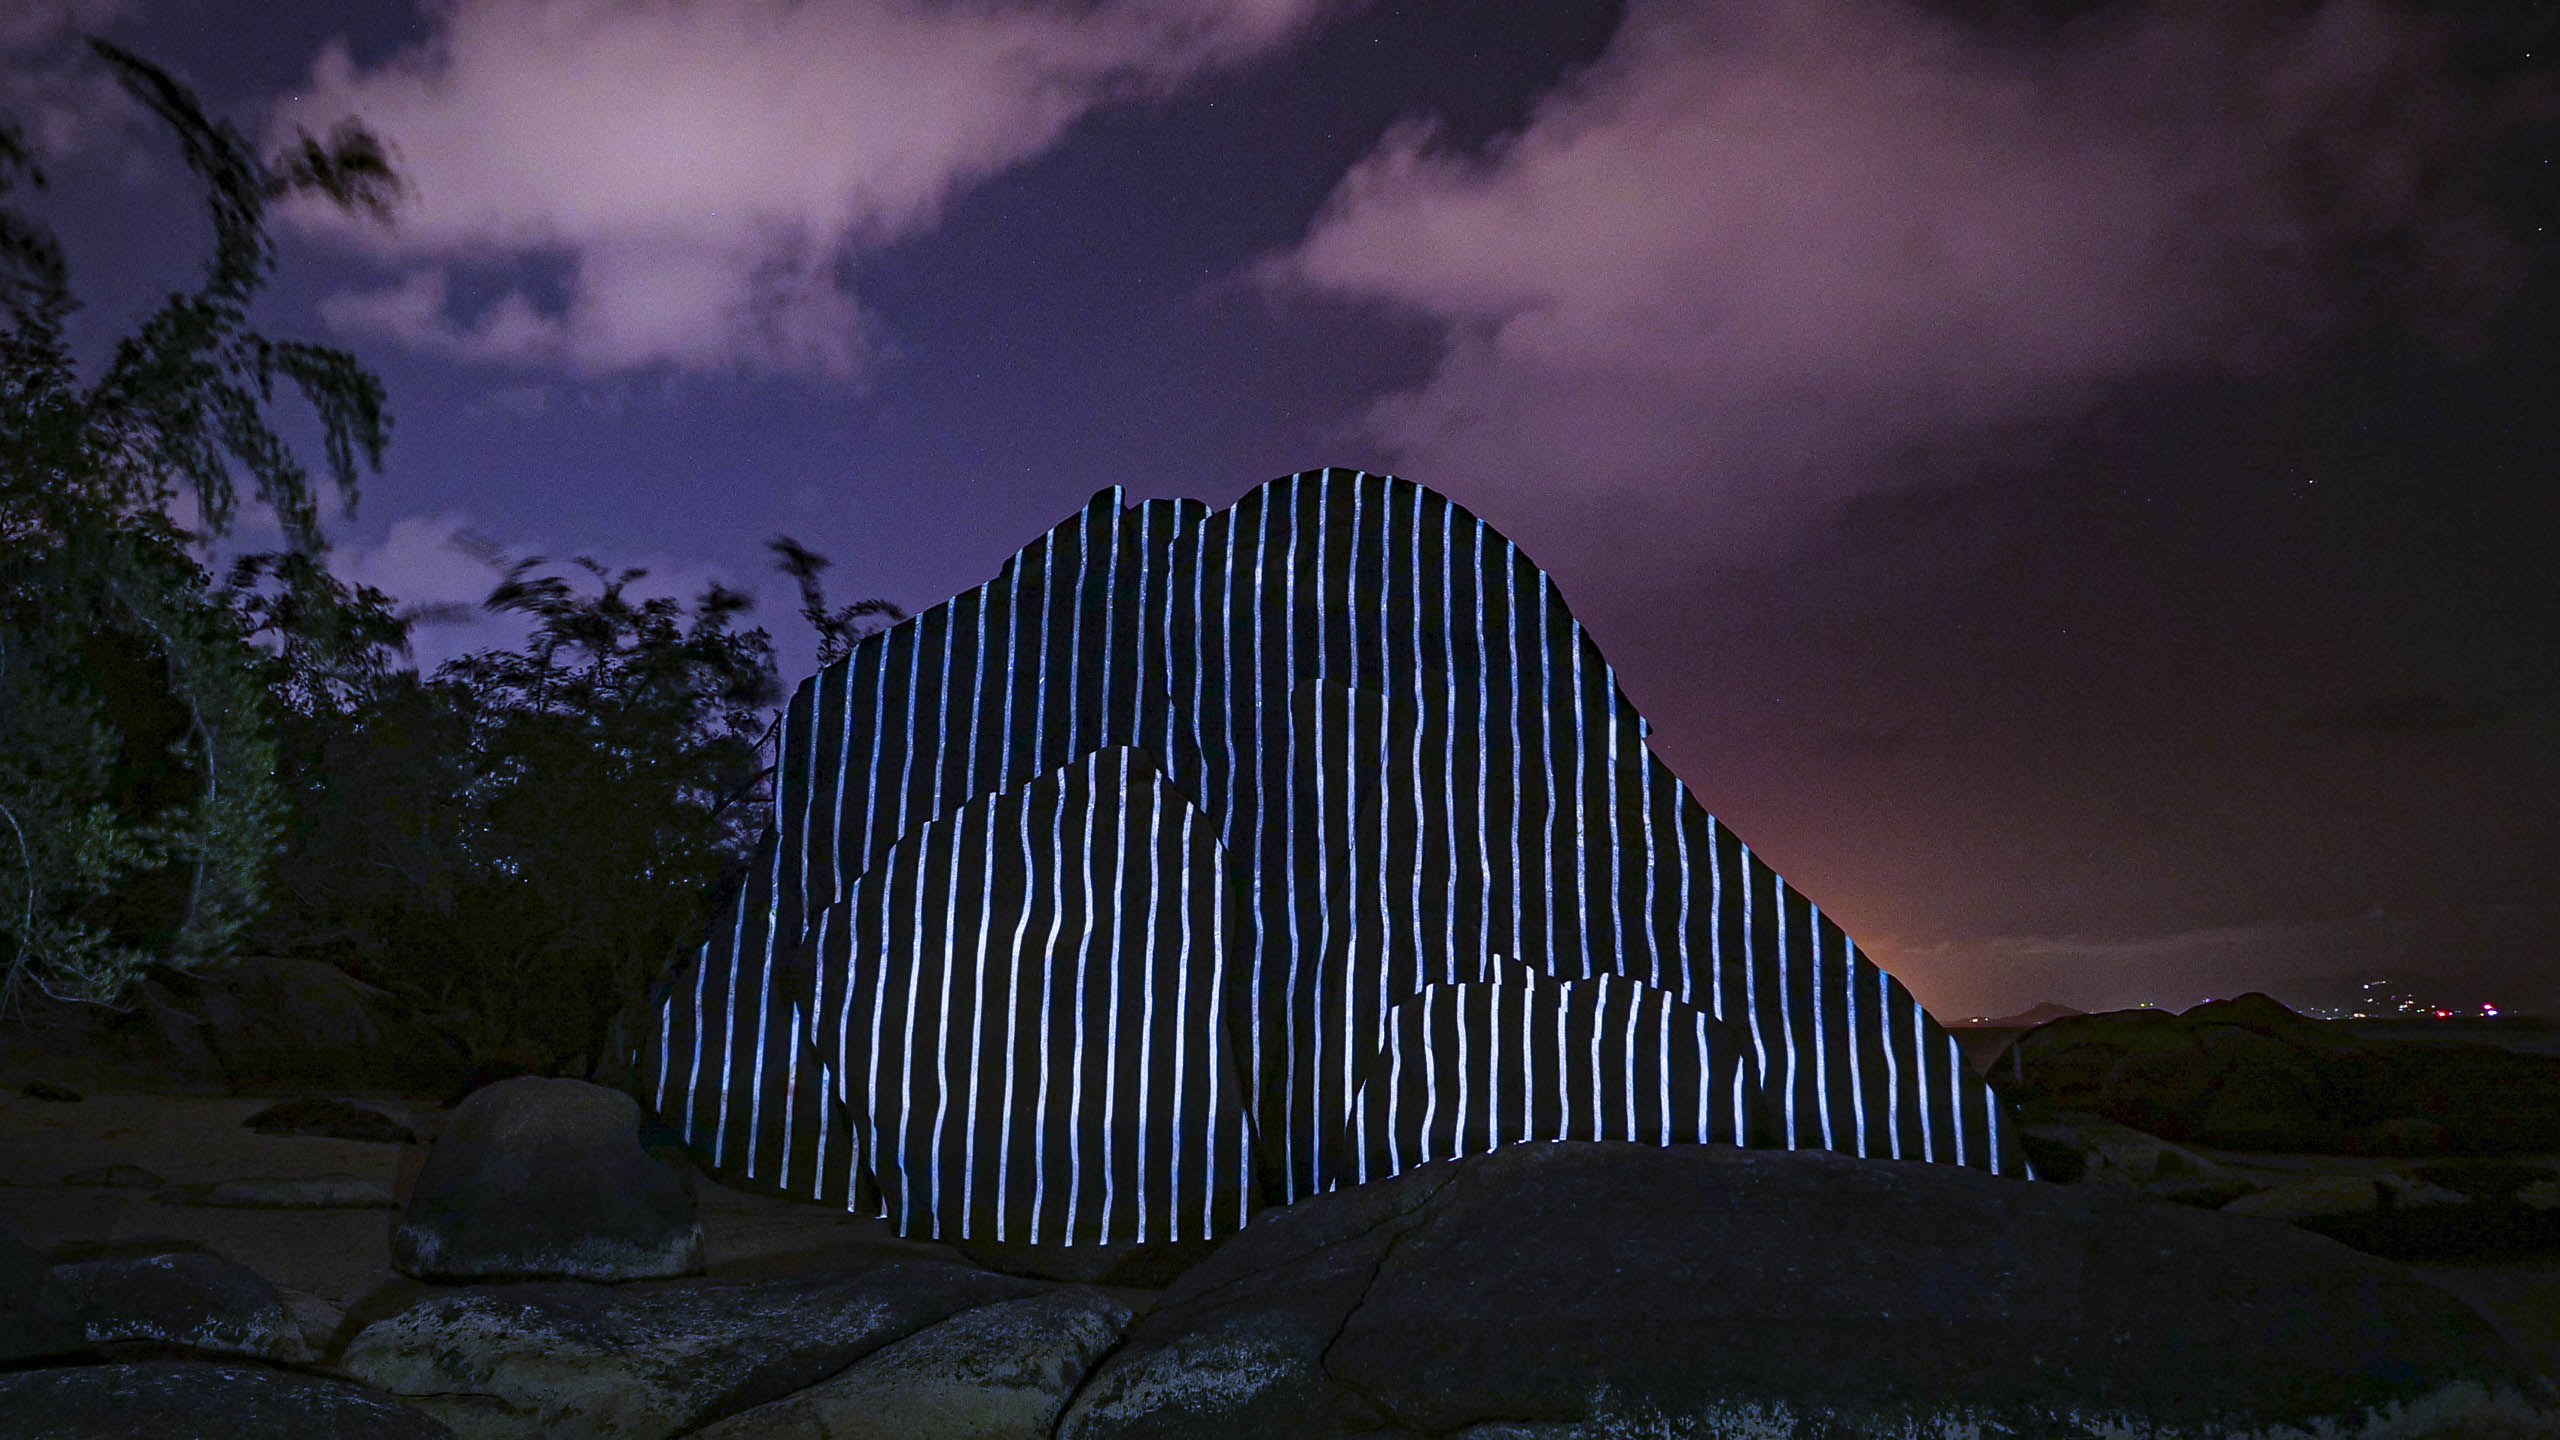 light art, 3d projection mapping by philipp frank. Located on a rock at the beach